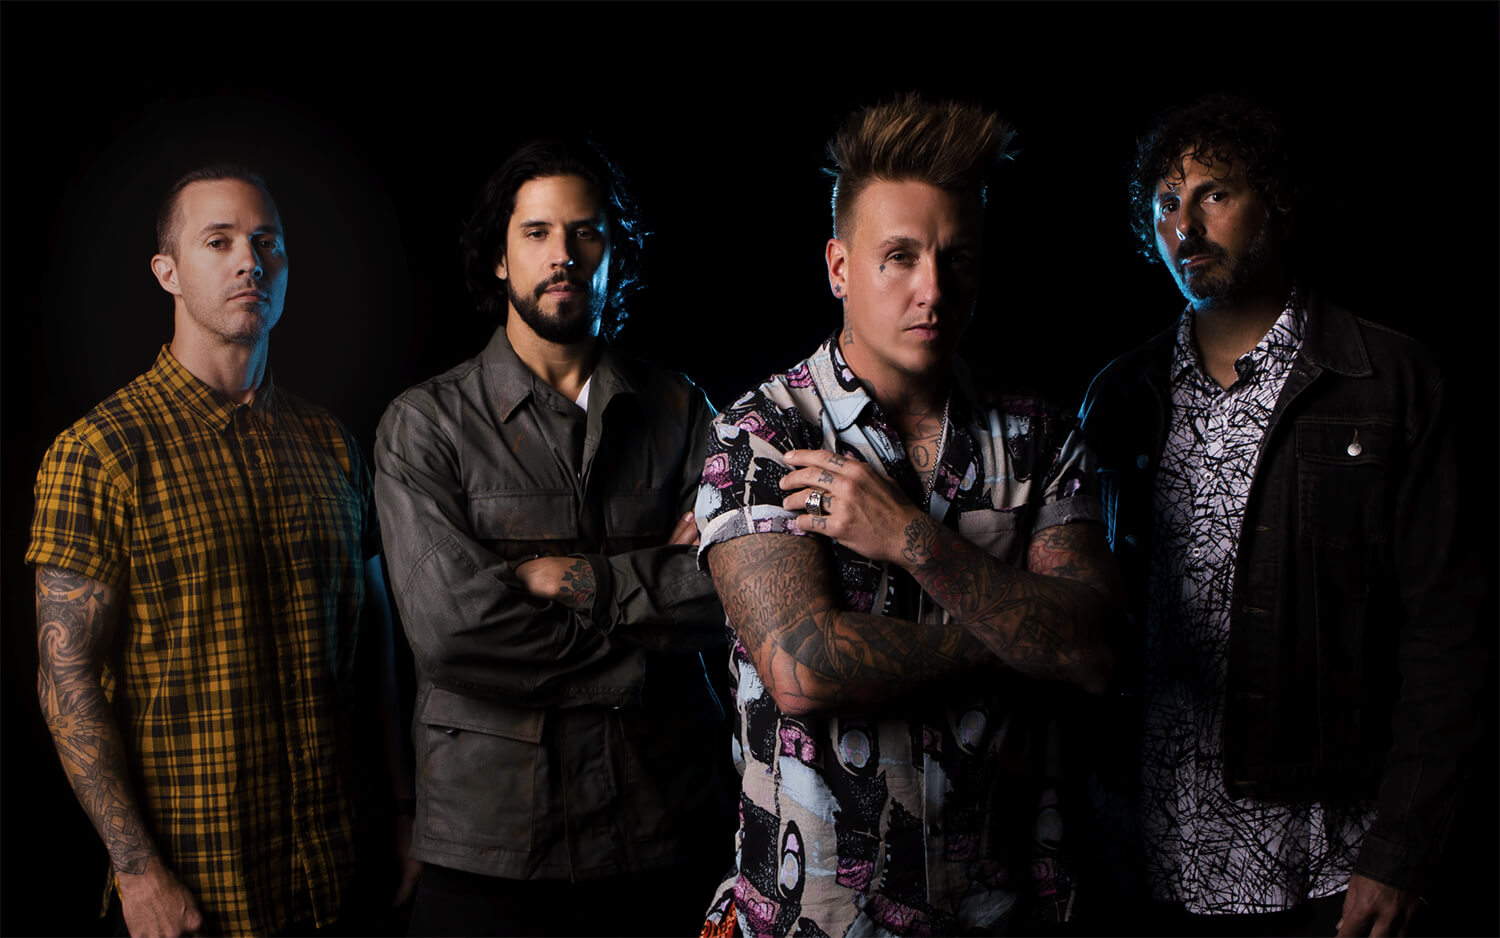 PAPA ROACH ANNOUNCE ‘INFEST’ 20 YEAR ANNIVERSARY LIVE STREAM PERFORMANCE